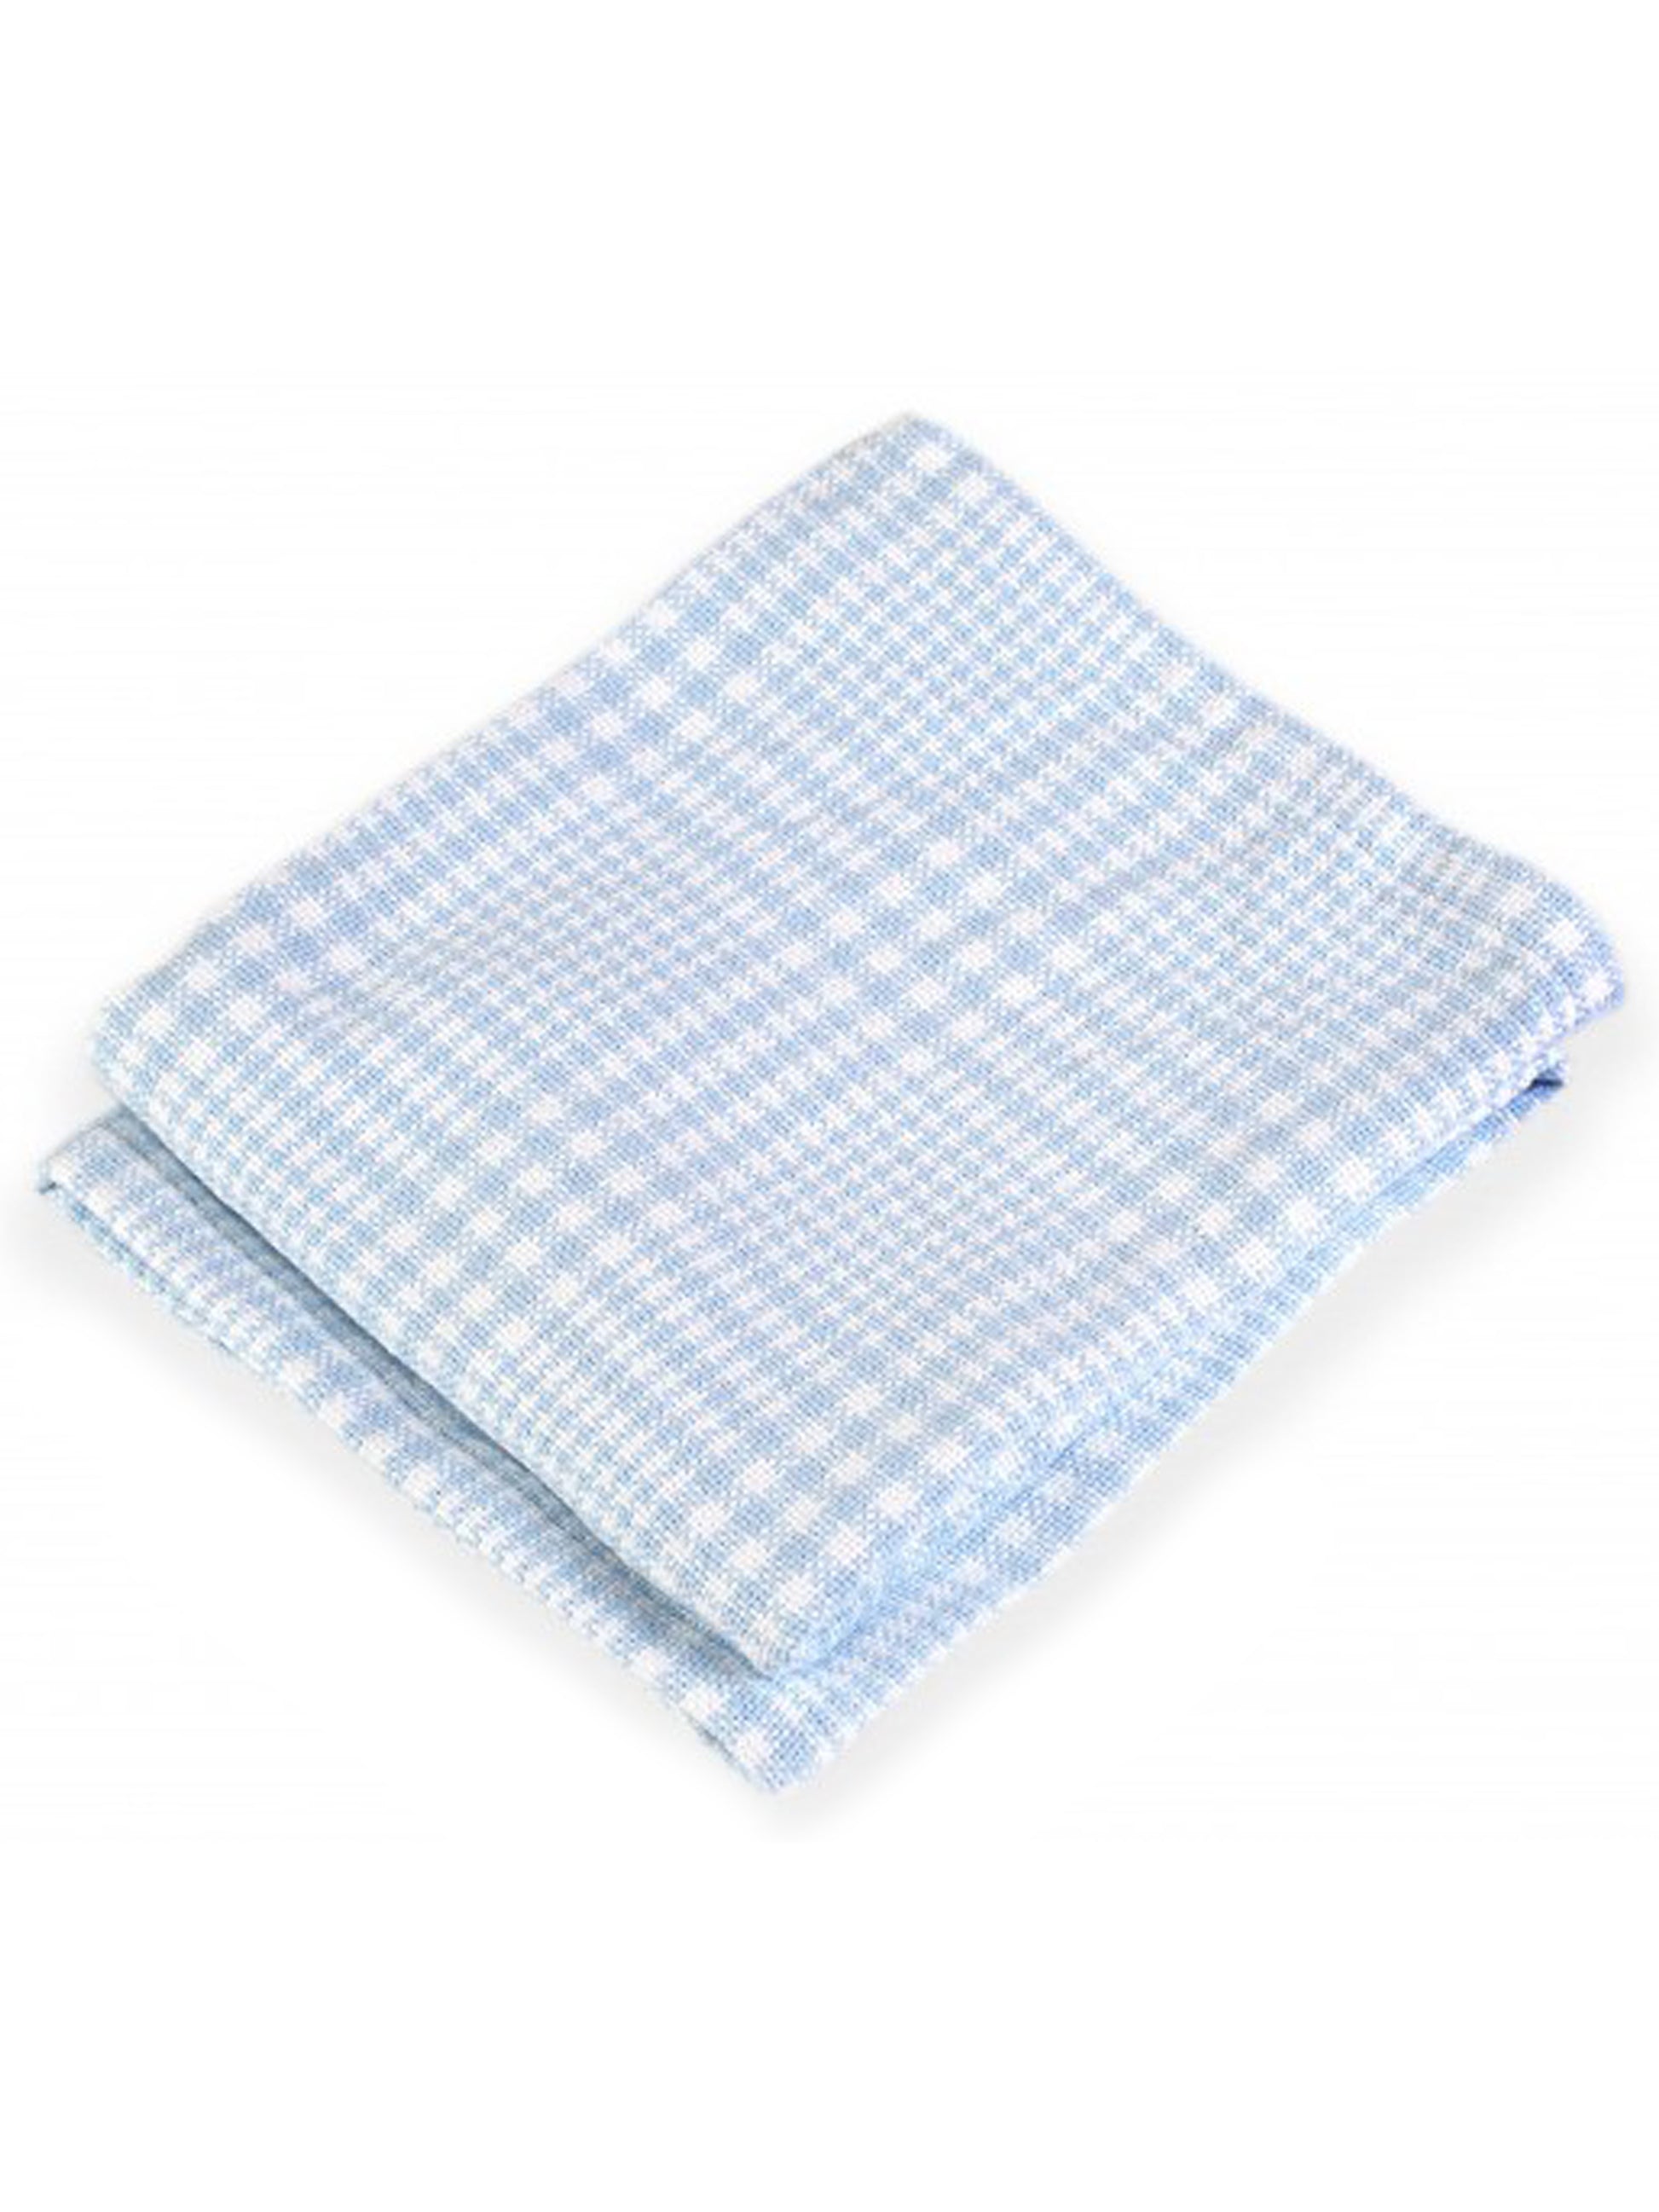 Brahms Mount Puffin Baby Blanket Blue Weston Table